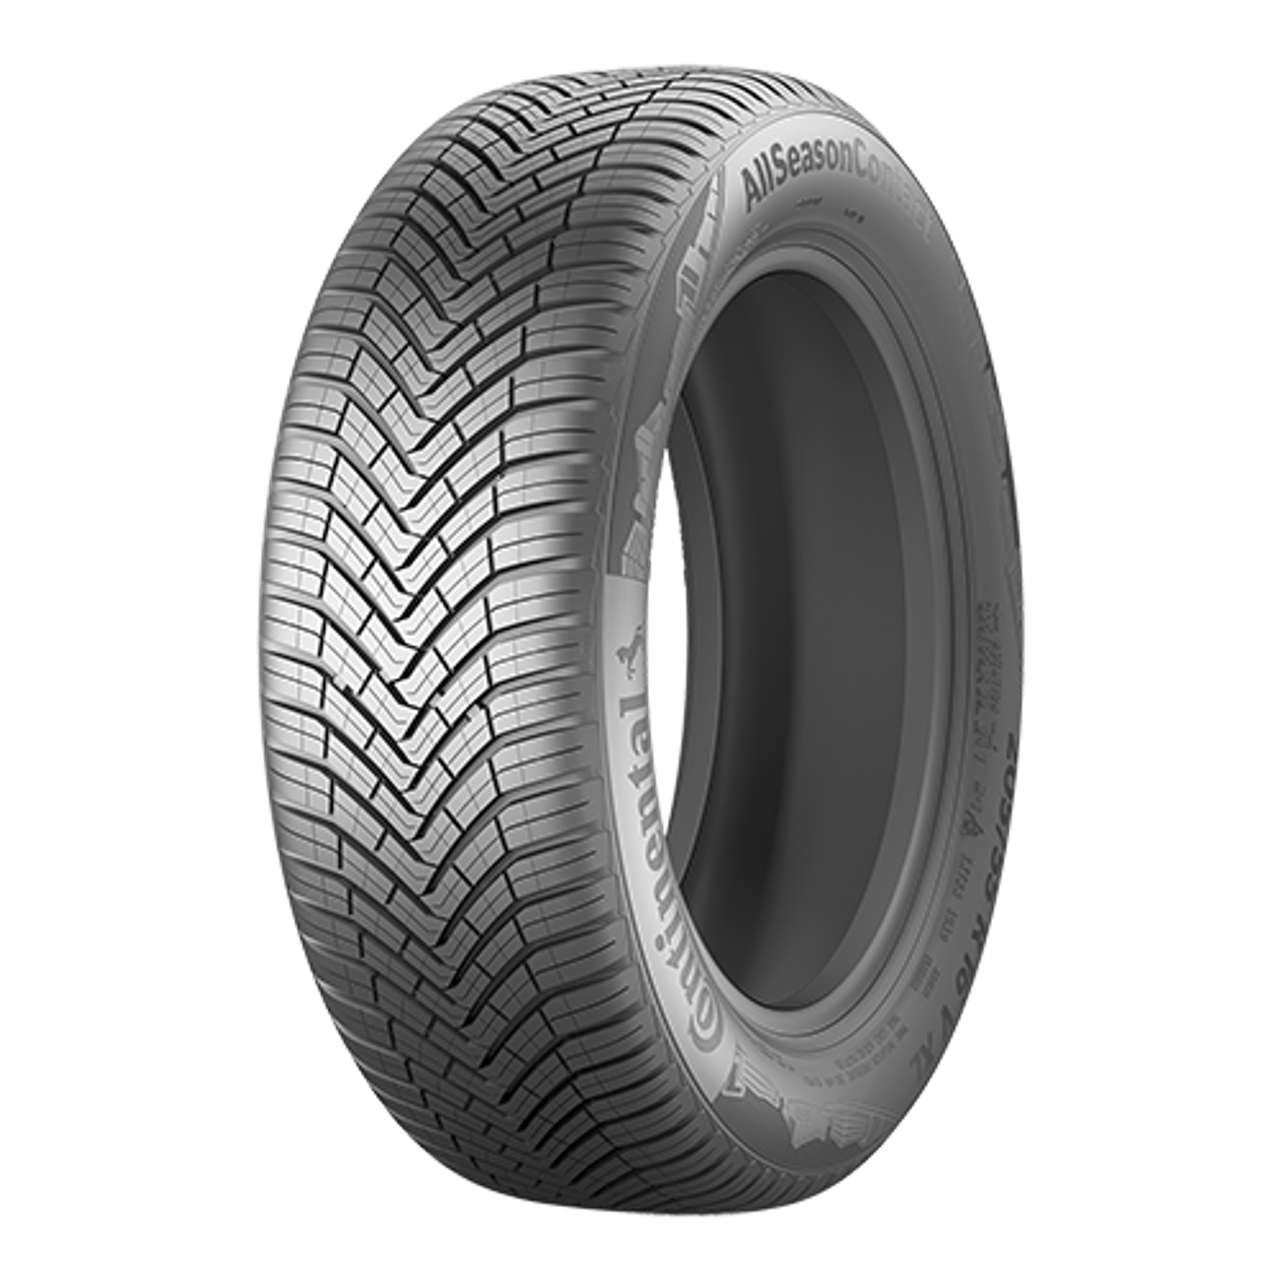 CONTINENTAL ALLSEASONCONTACT (EVc) 205/65R15 99V BSW